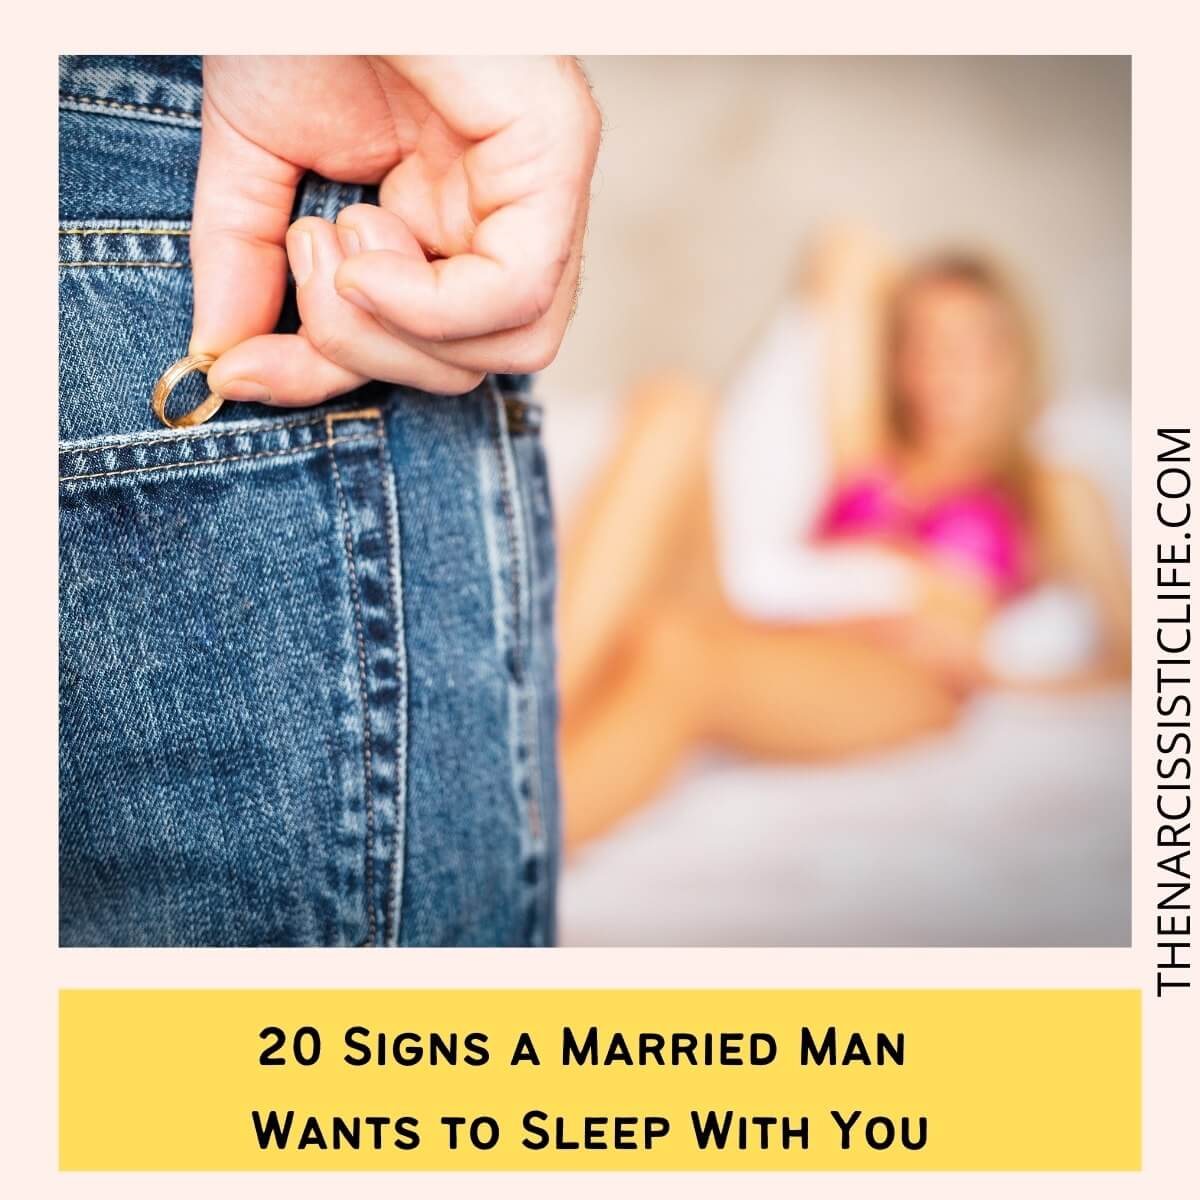 20 Sure Signs a Married Man Wants To Sleep With pic